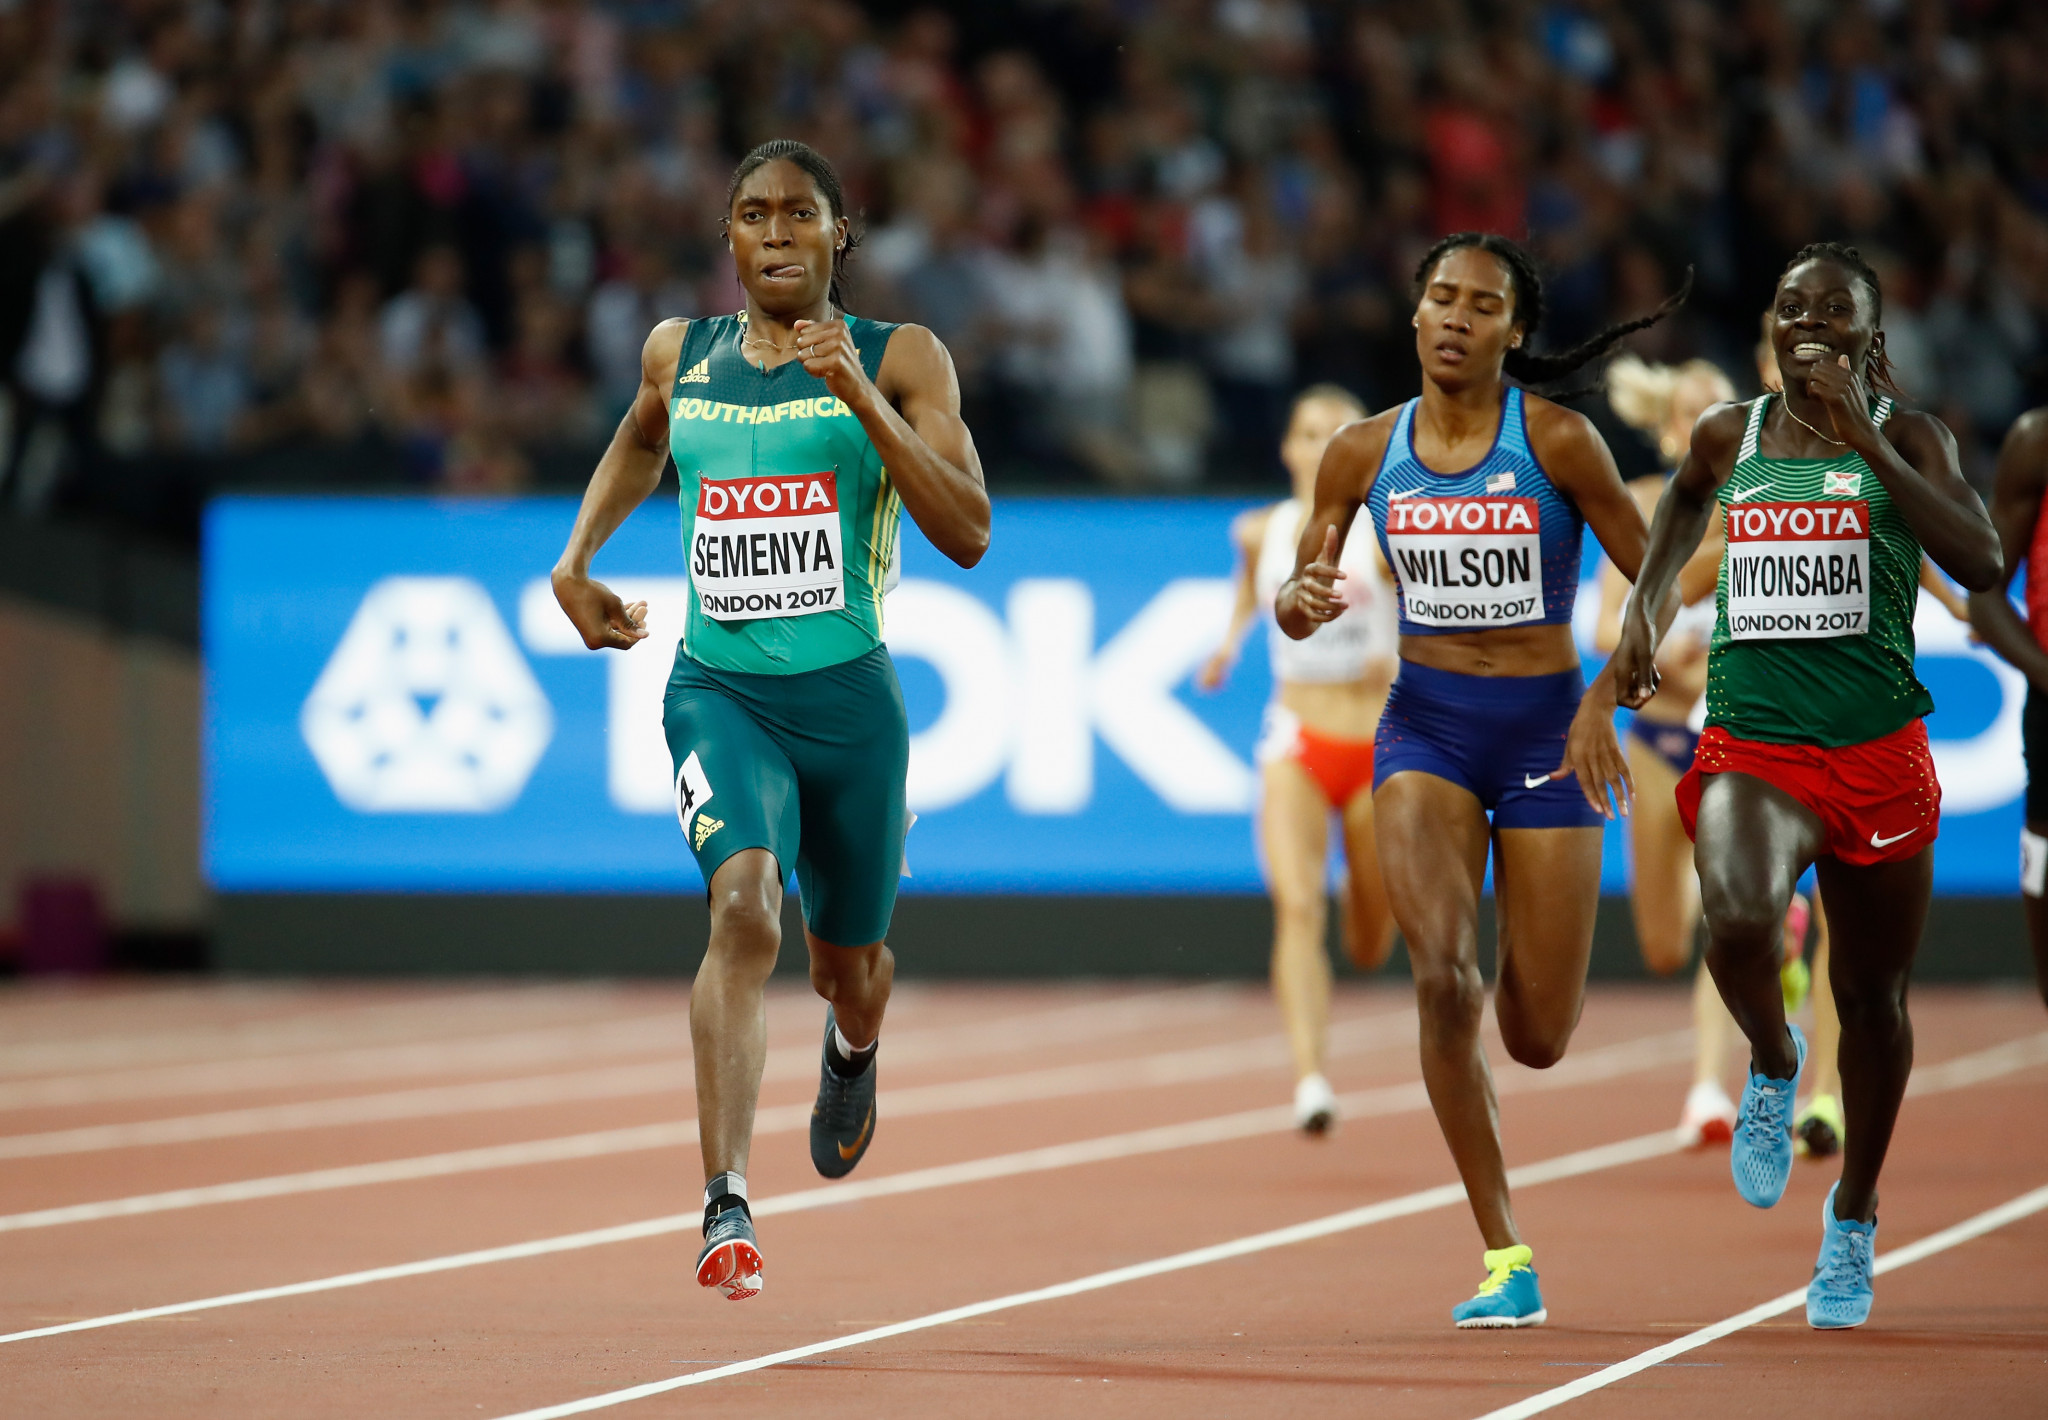 United Nations human rights experts call IAAF's female classification ruling "unjustifiable"